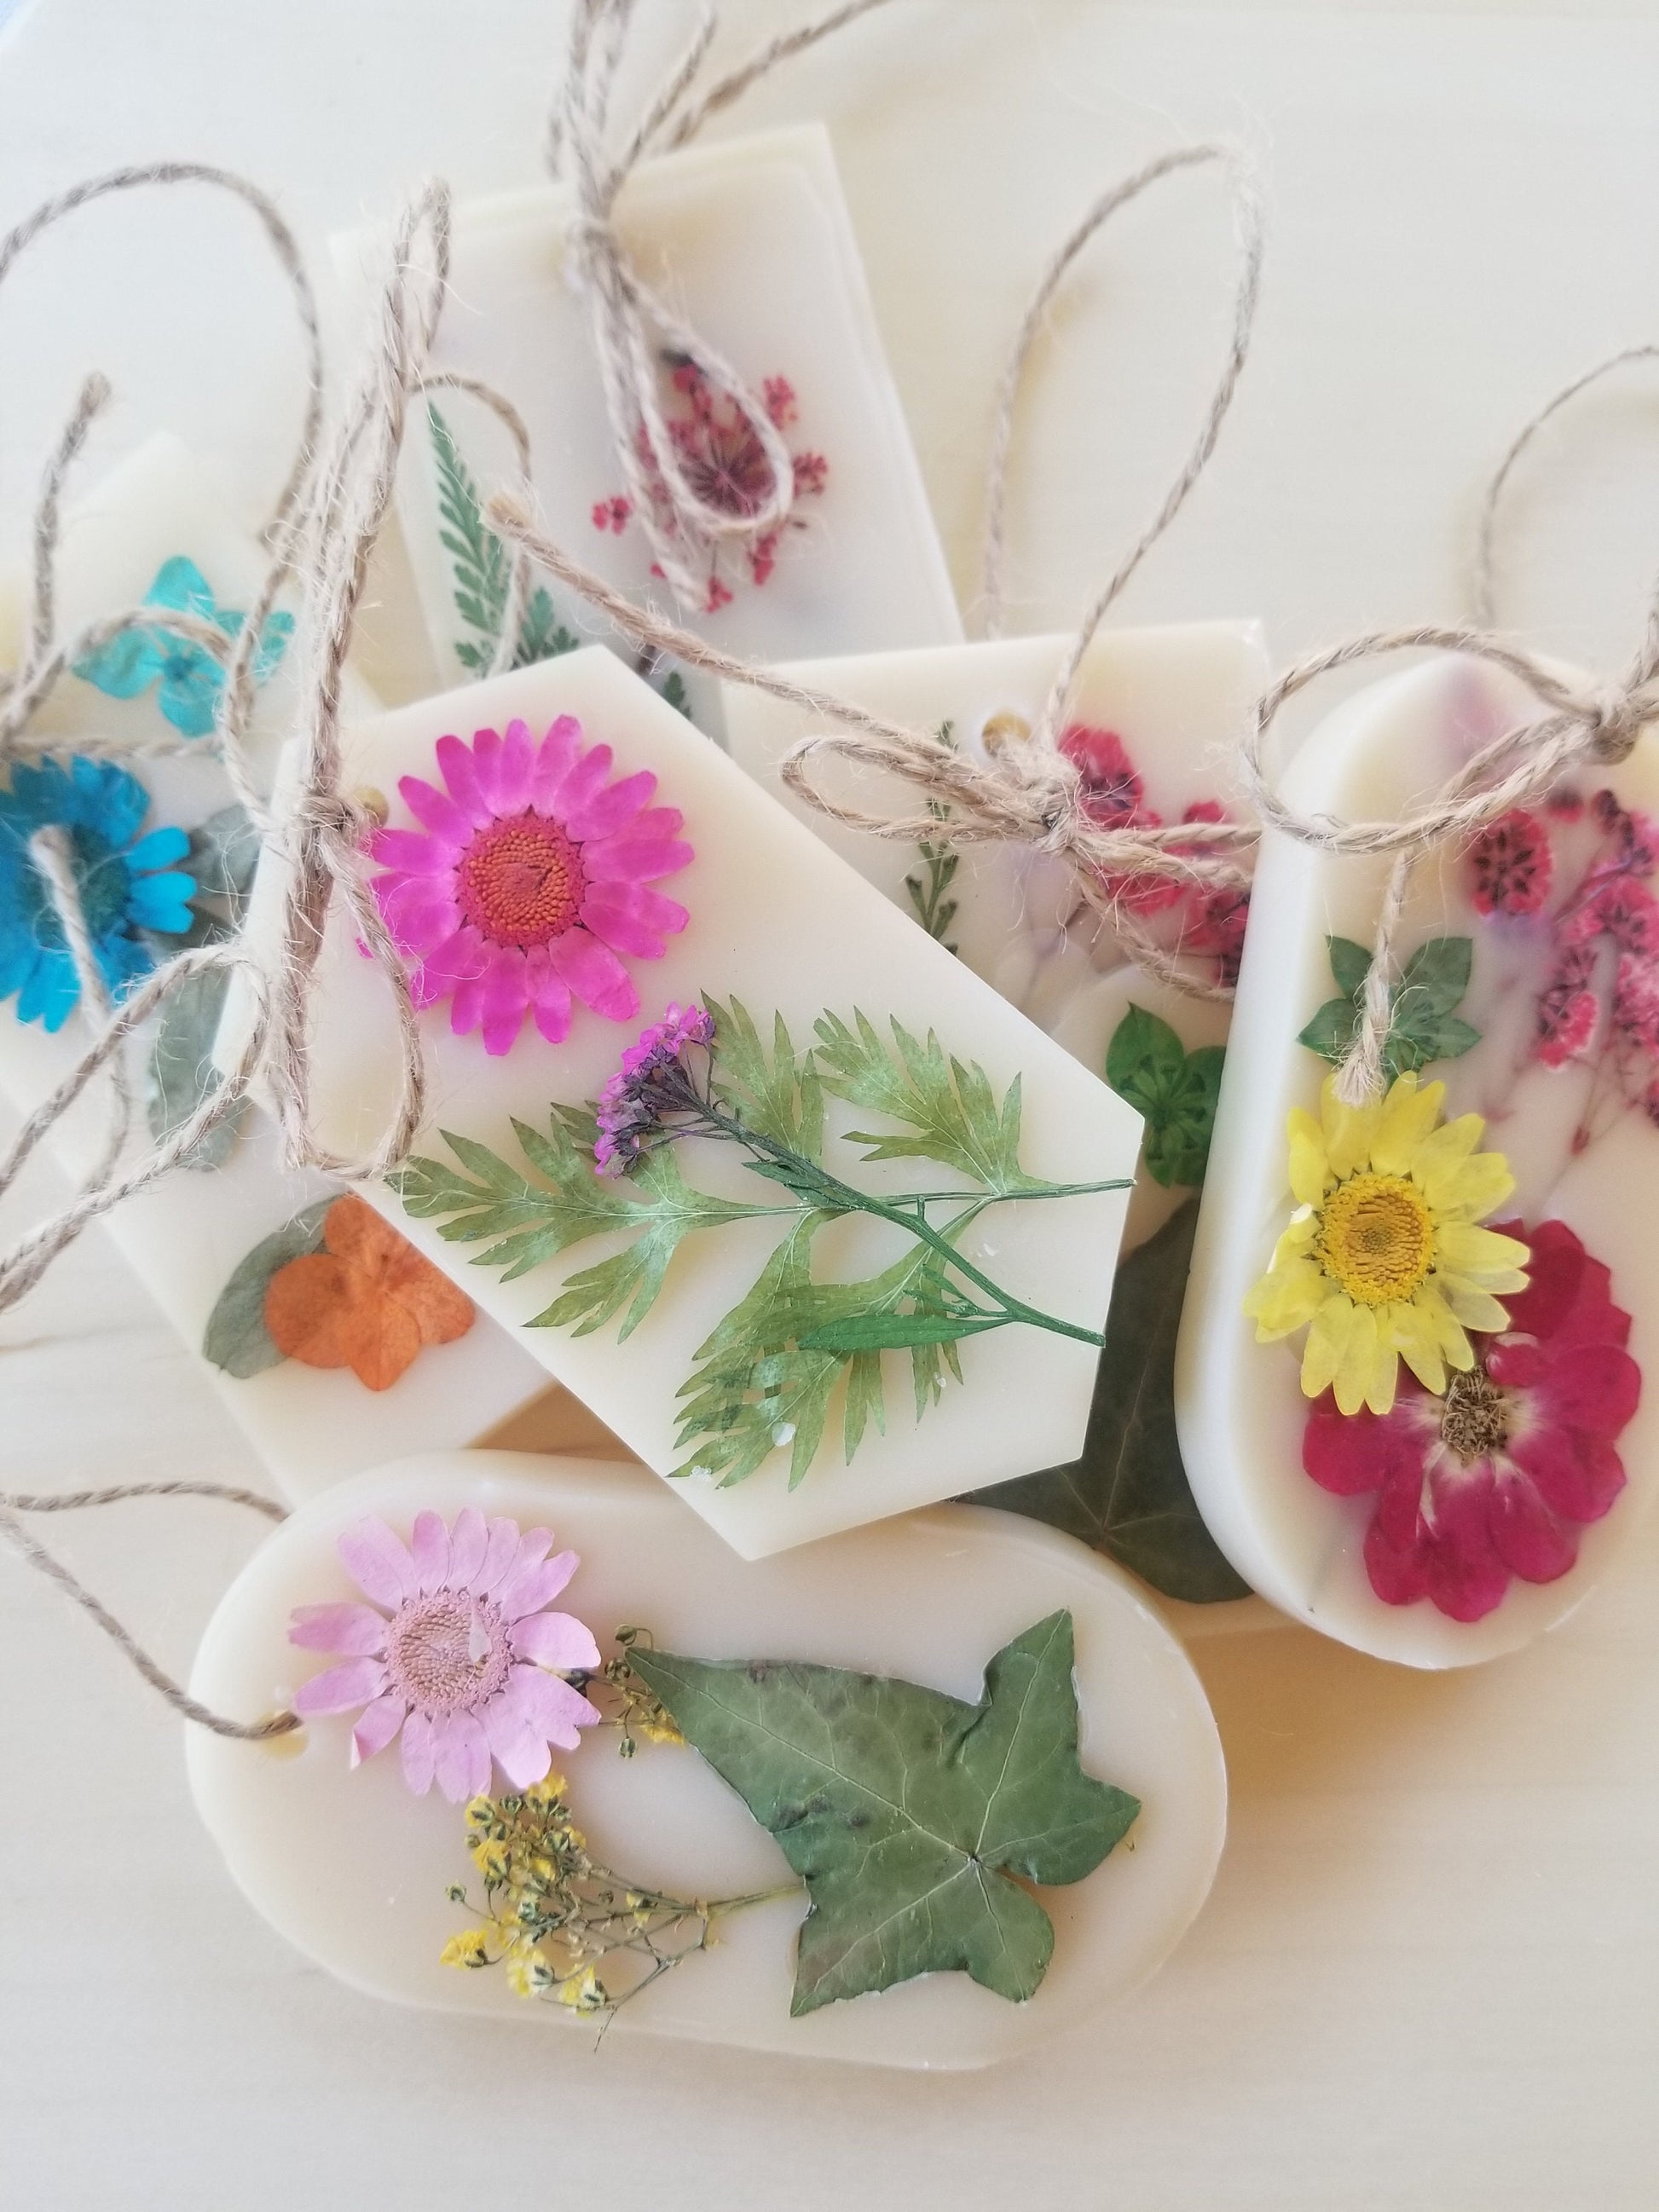 DIY Scented Wax Sachets with Soy Wax, Botanicals & Essential Oils